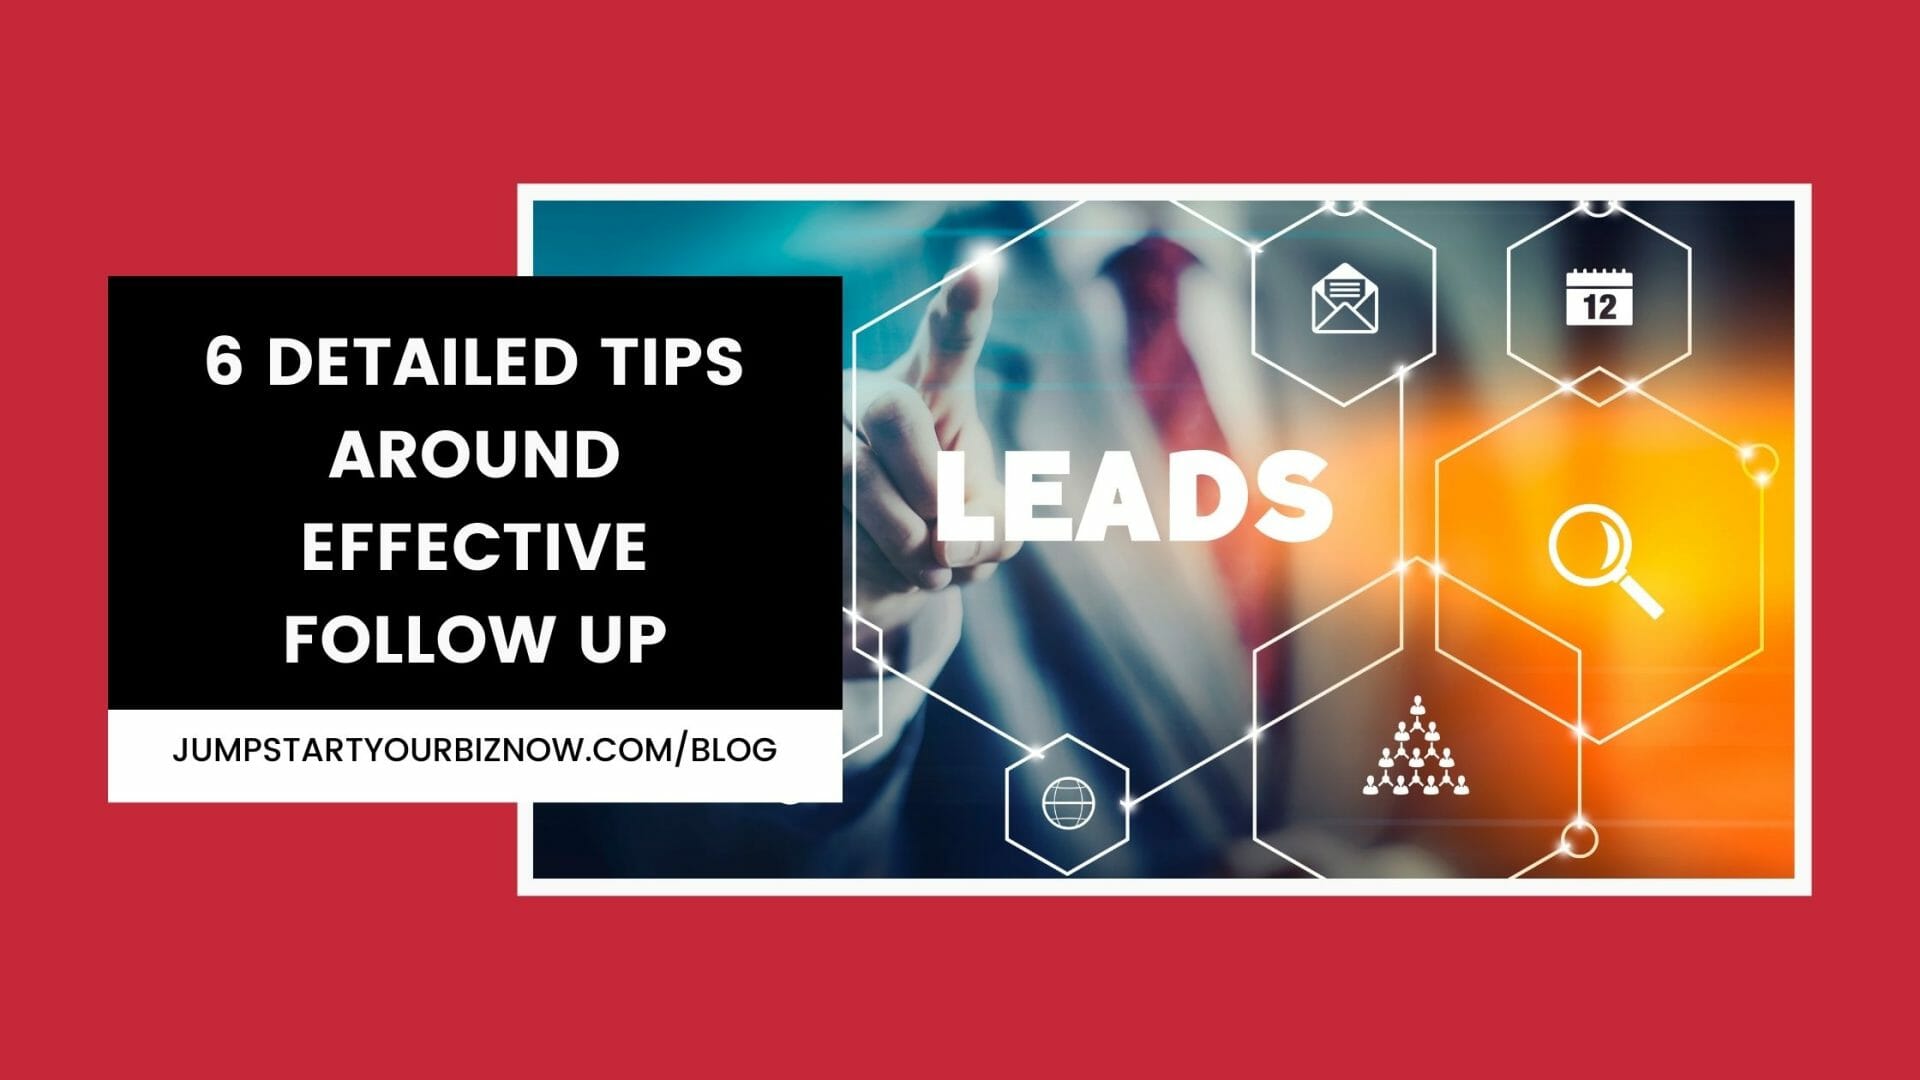 6 detailed tips around effective follow up